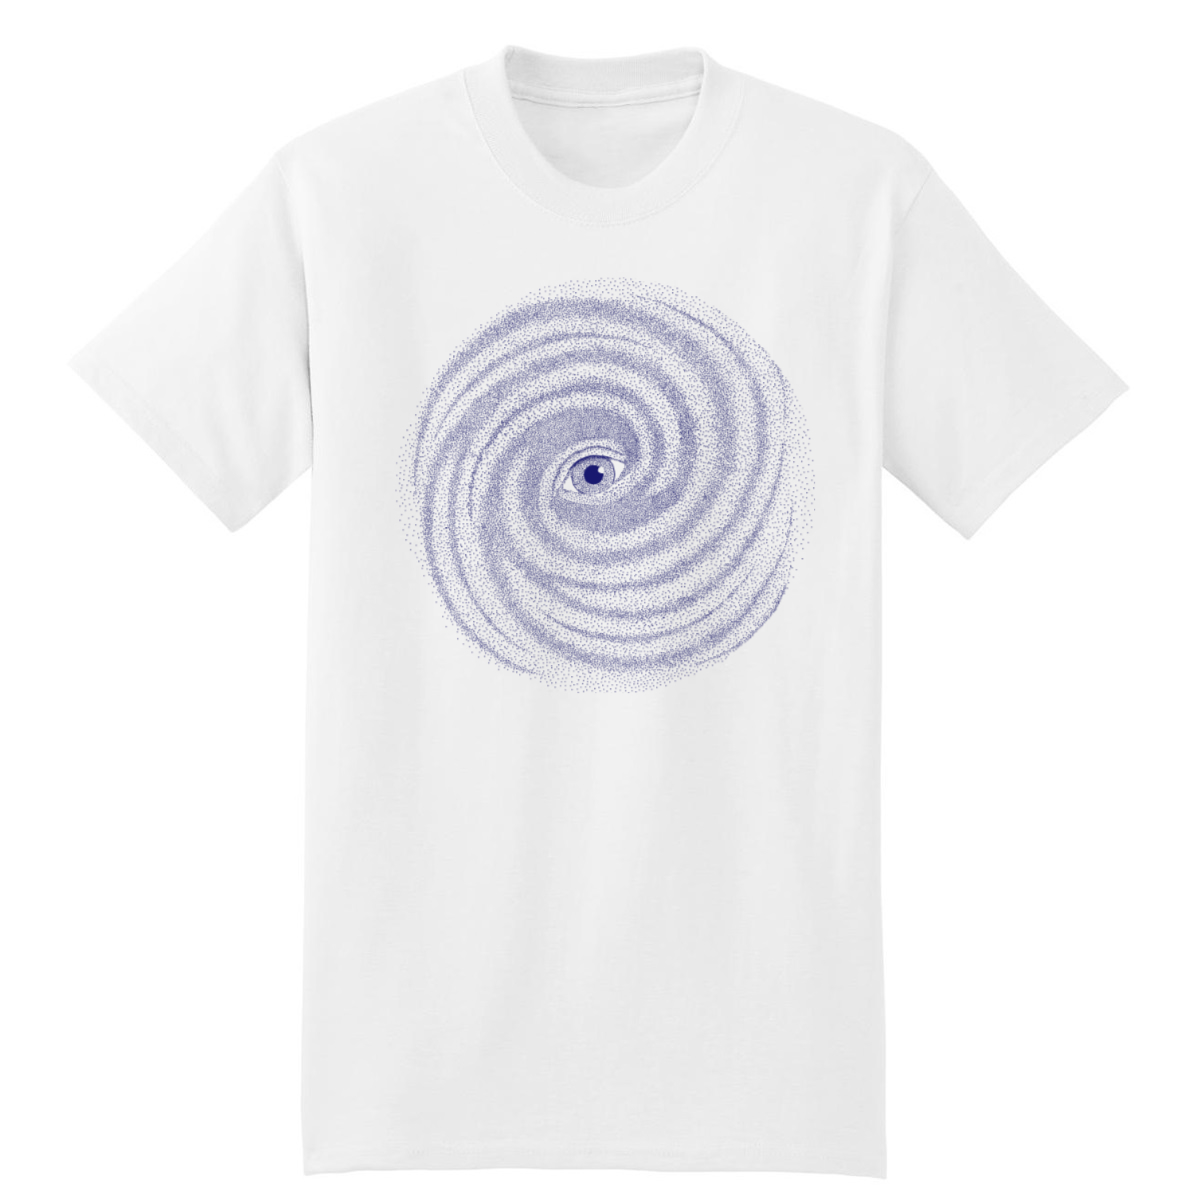 Reflections in the Eye T-Shirts